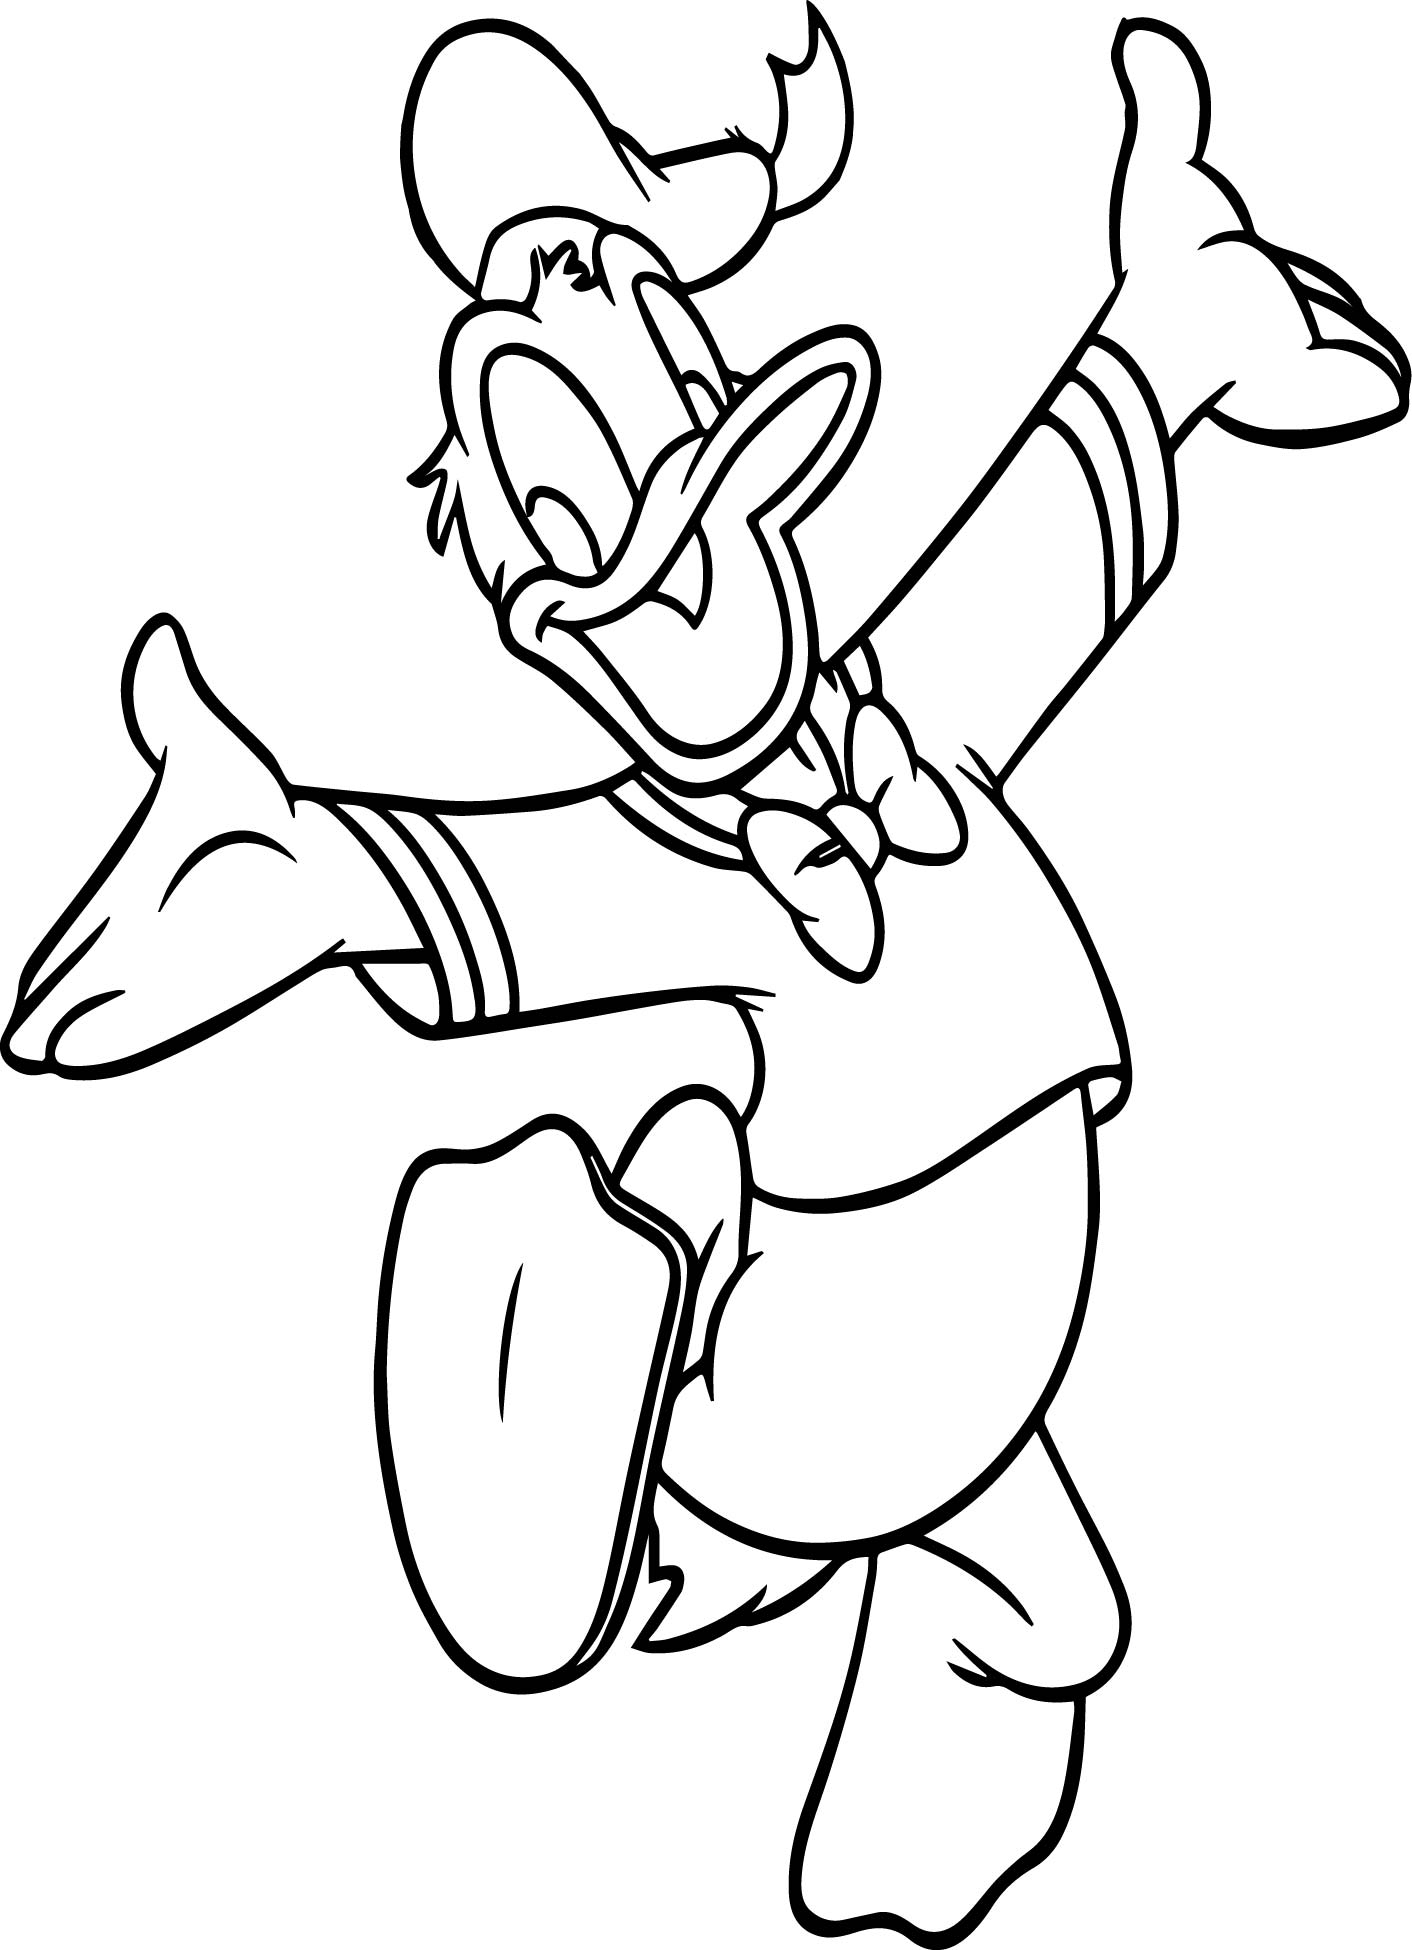 disney-characters-printable-coloring-pages